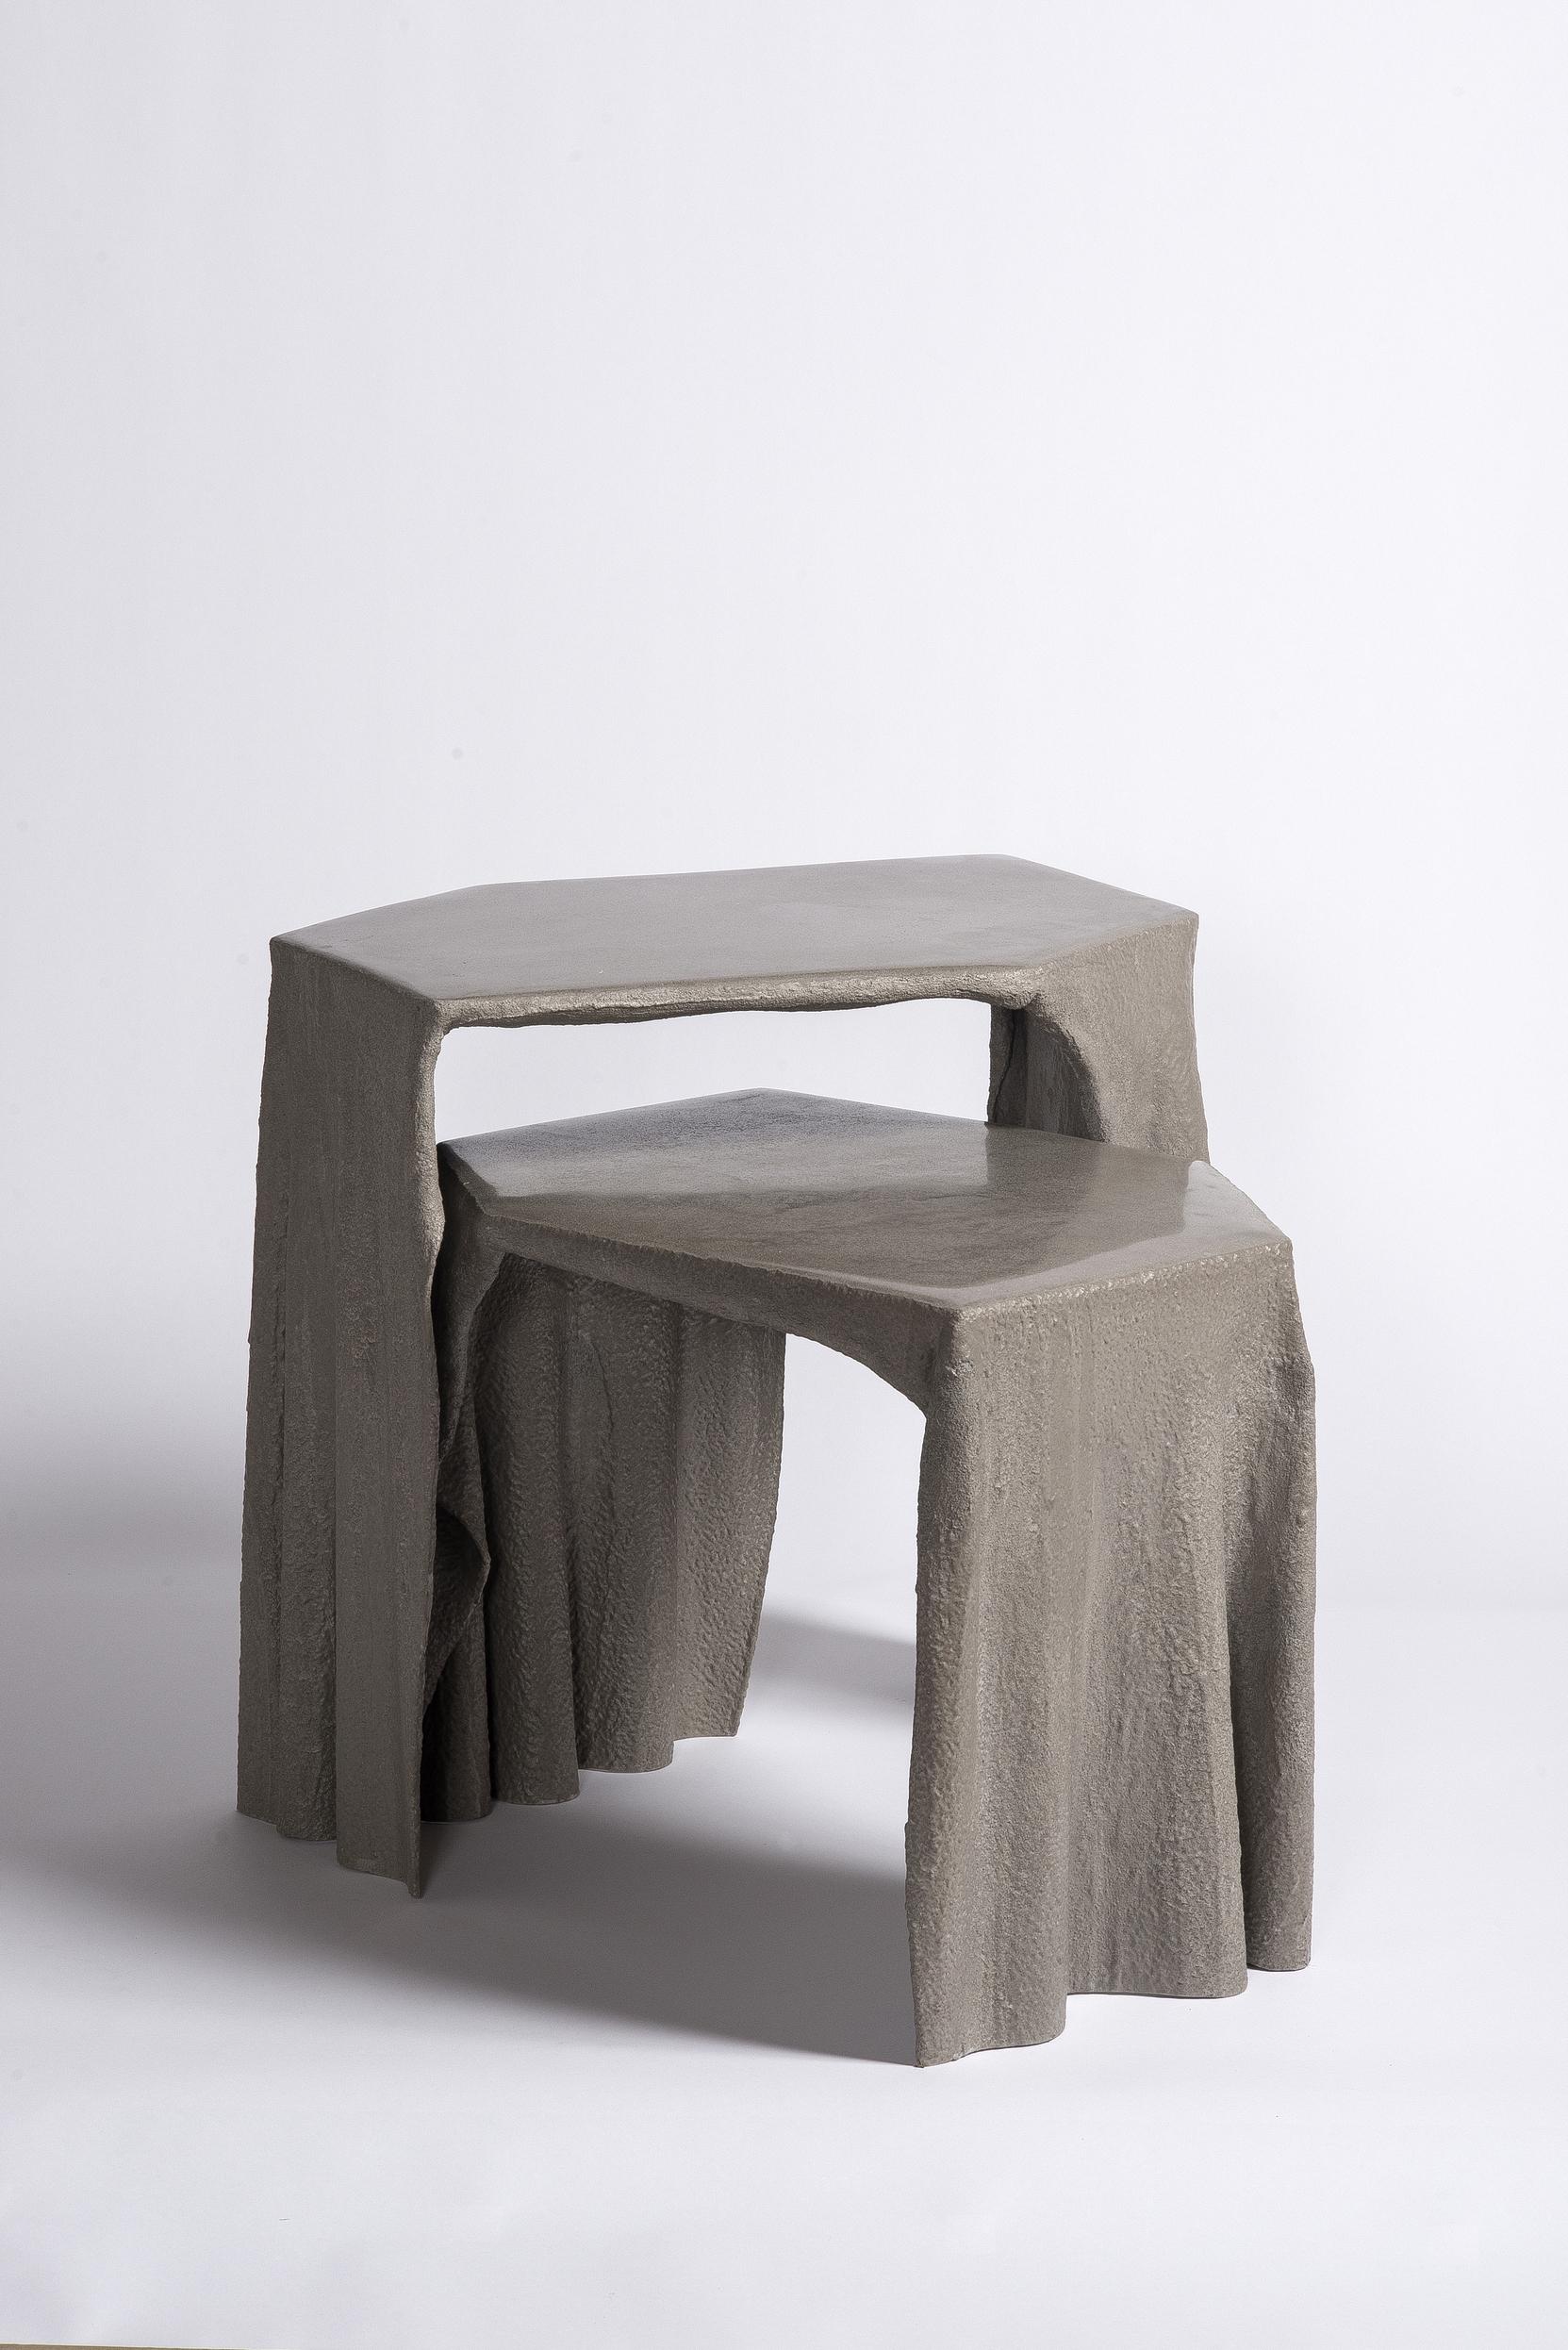 Inspired by Antoni Gaudí’s form study with gravity. The organic form of this table emanates from natural structures such as trees. Despite its delicate look, the table can handle around 40lb of weight, while still only weighing 15 lbs. The table is